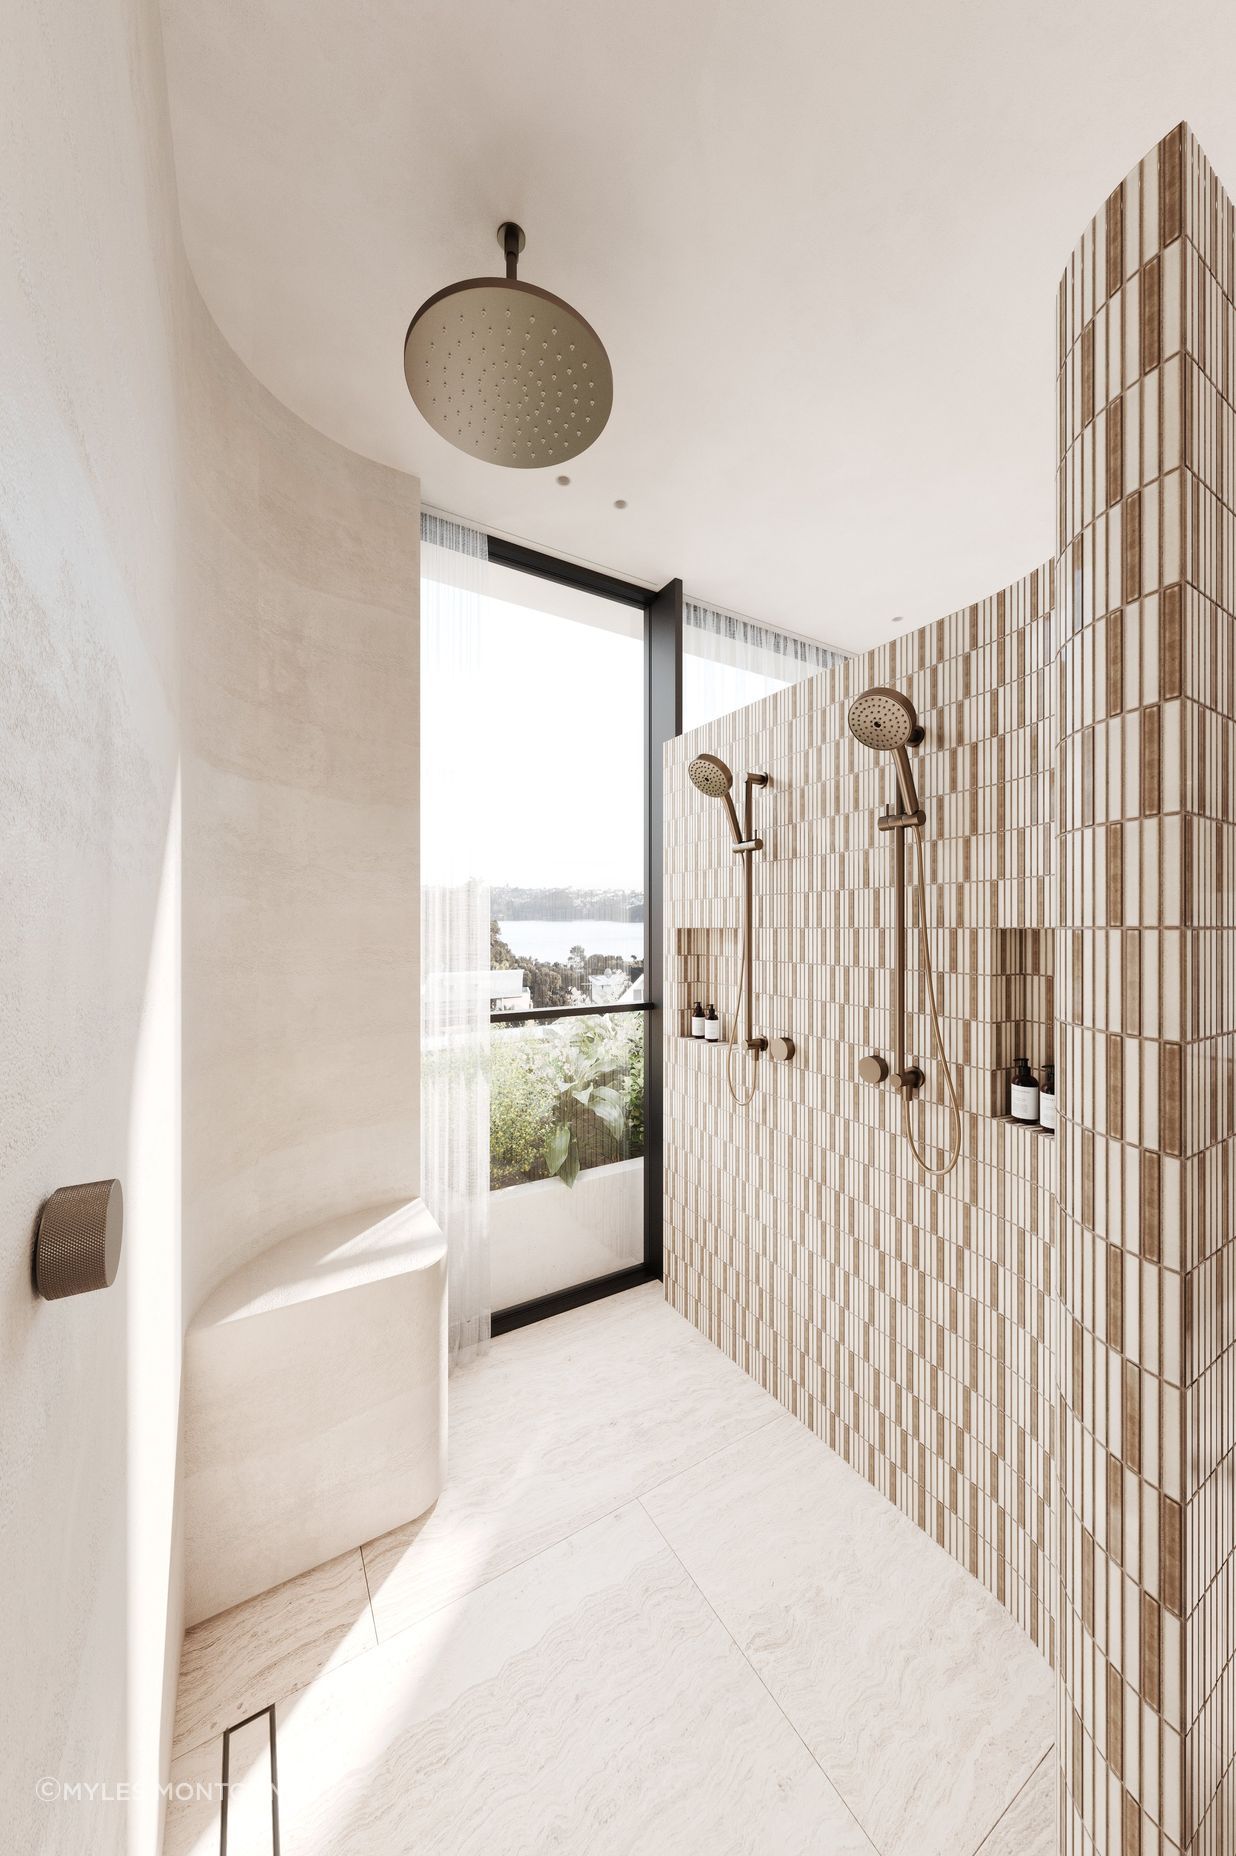 Refined double showers provide a ritualistic setting.